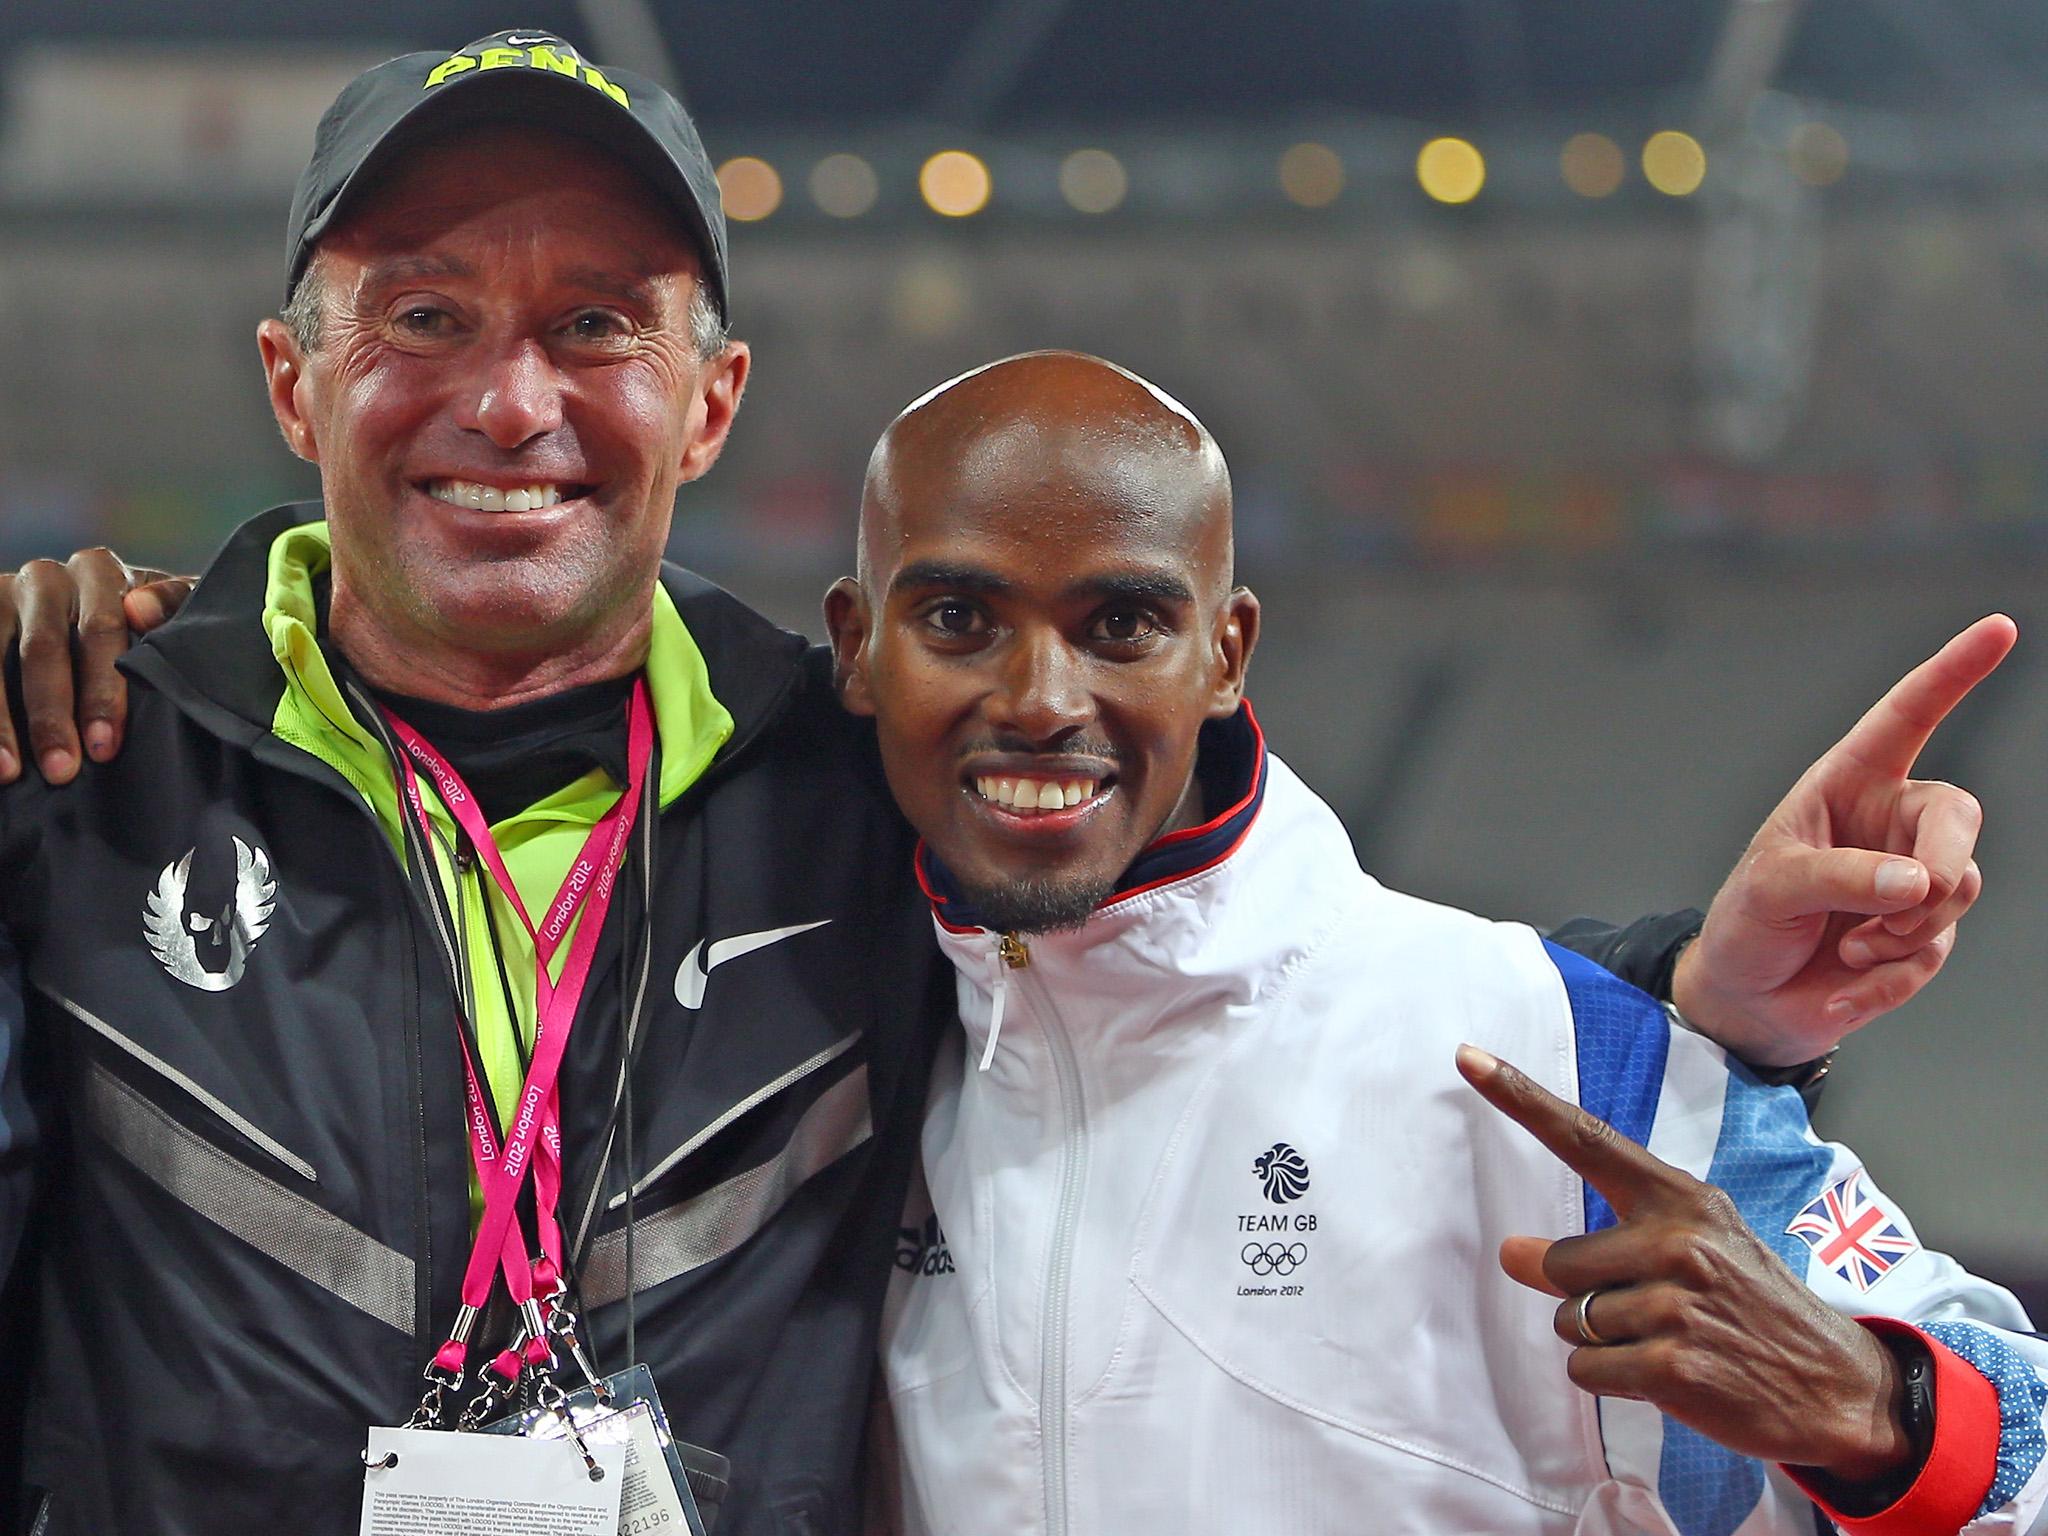 Alberto Salazar alleged to have abused prescription medicines and used prohibited fusions to boost testosterone levels in his athletes